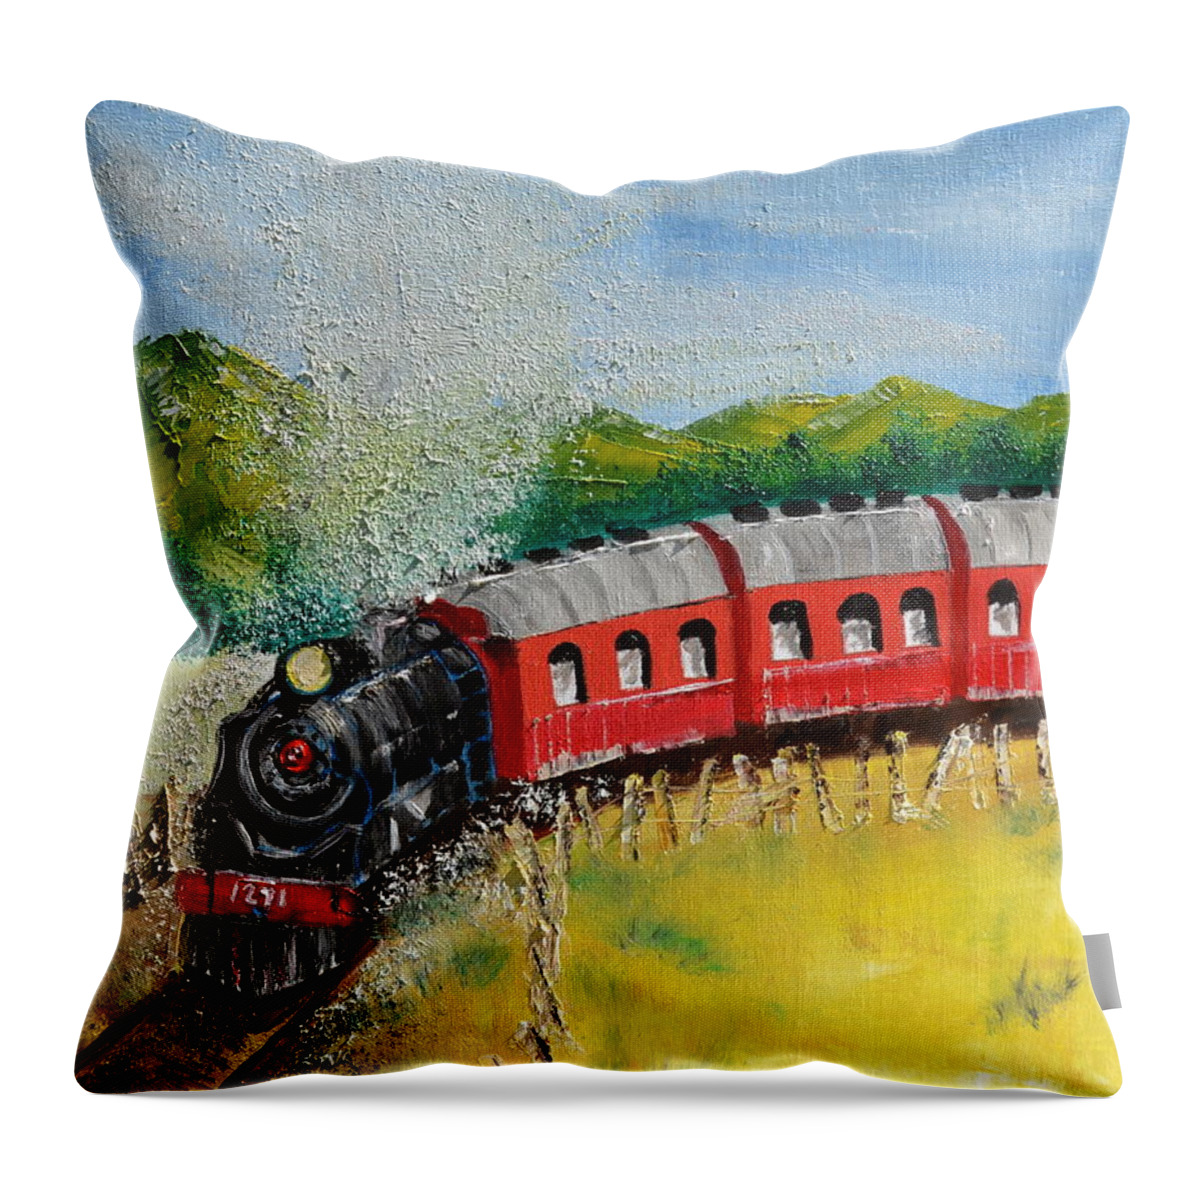 Steam Engine Throw Pillow featuring the painting 1271 Steam Engine by Denise Tomasura